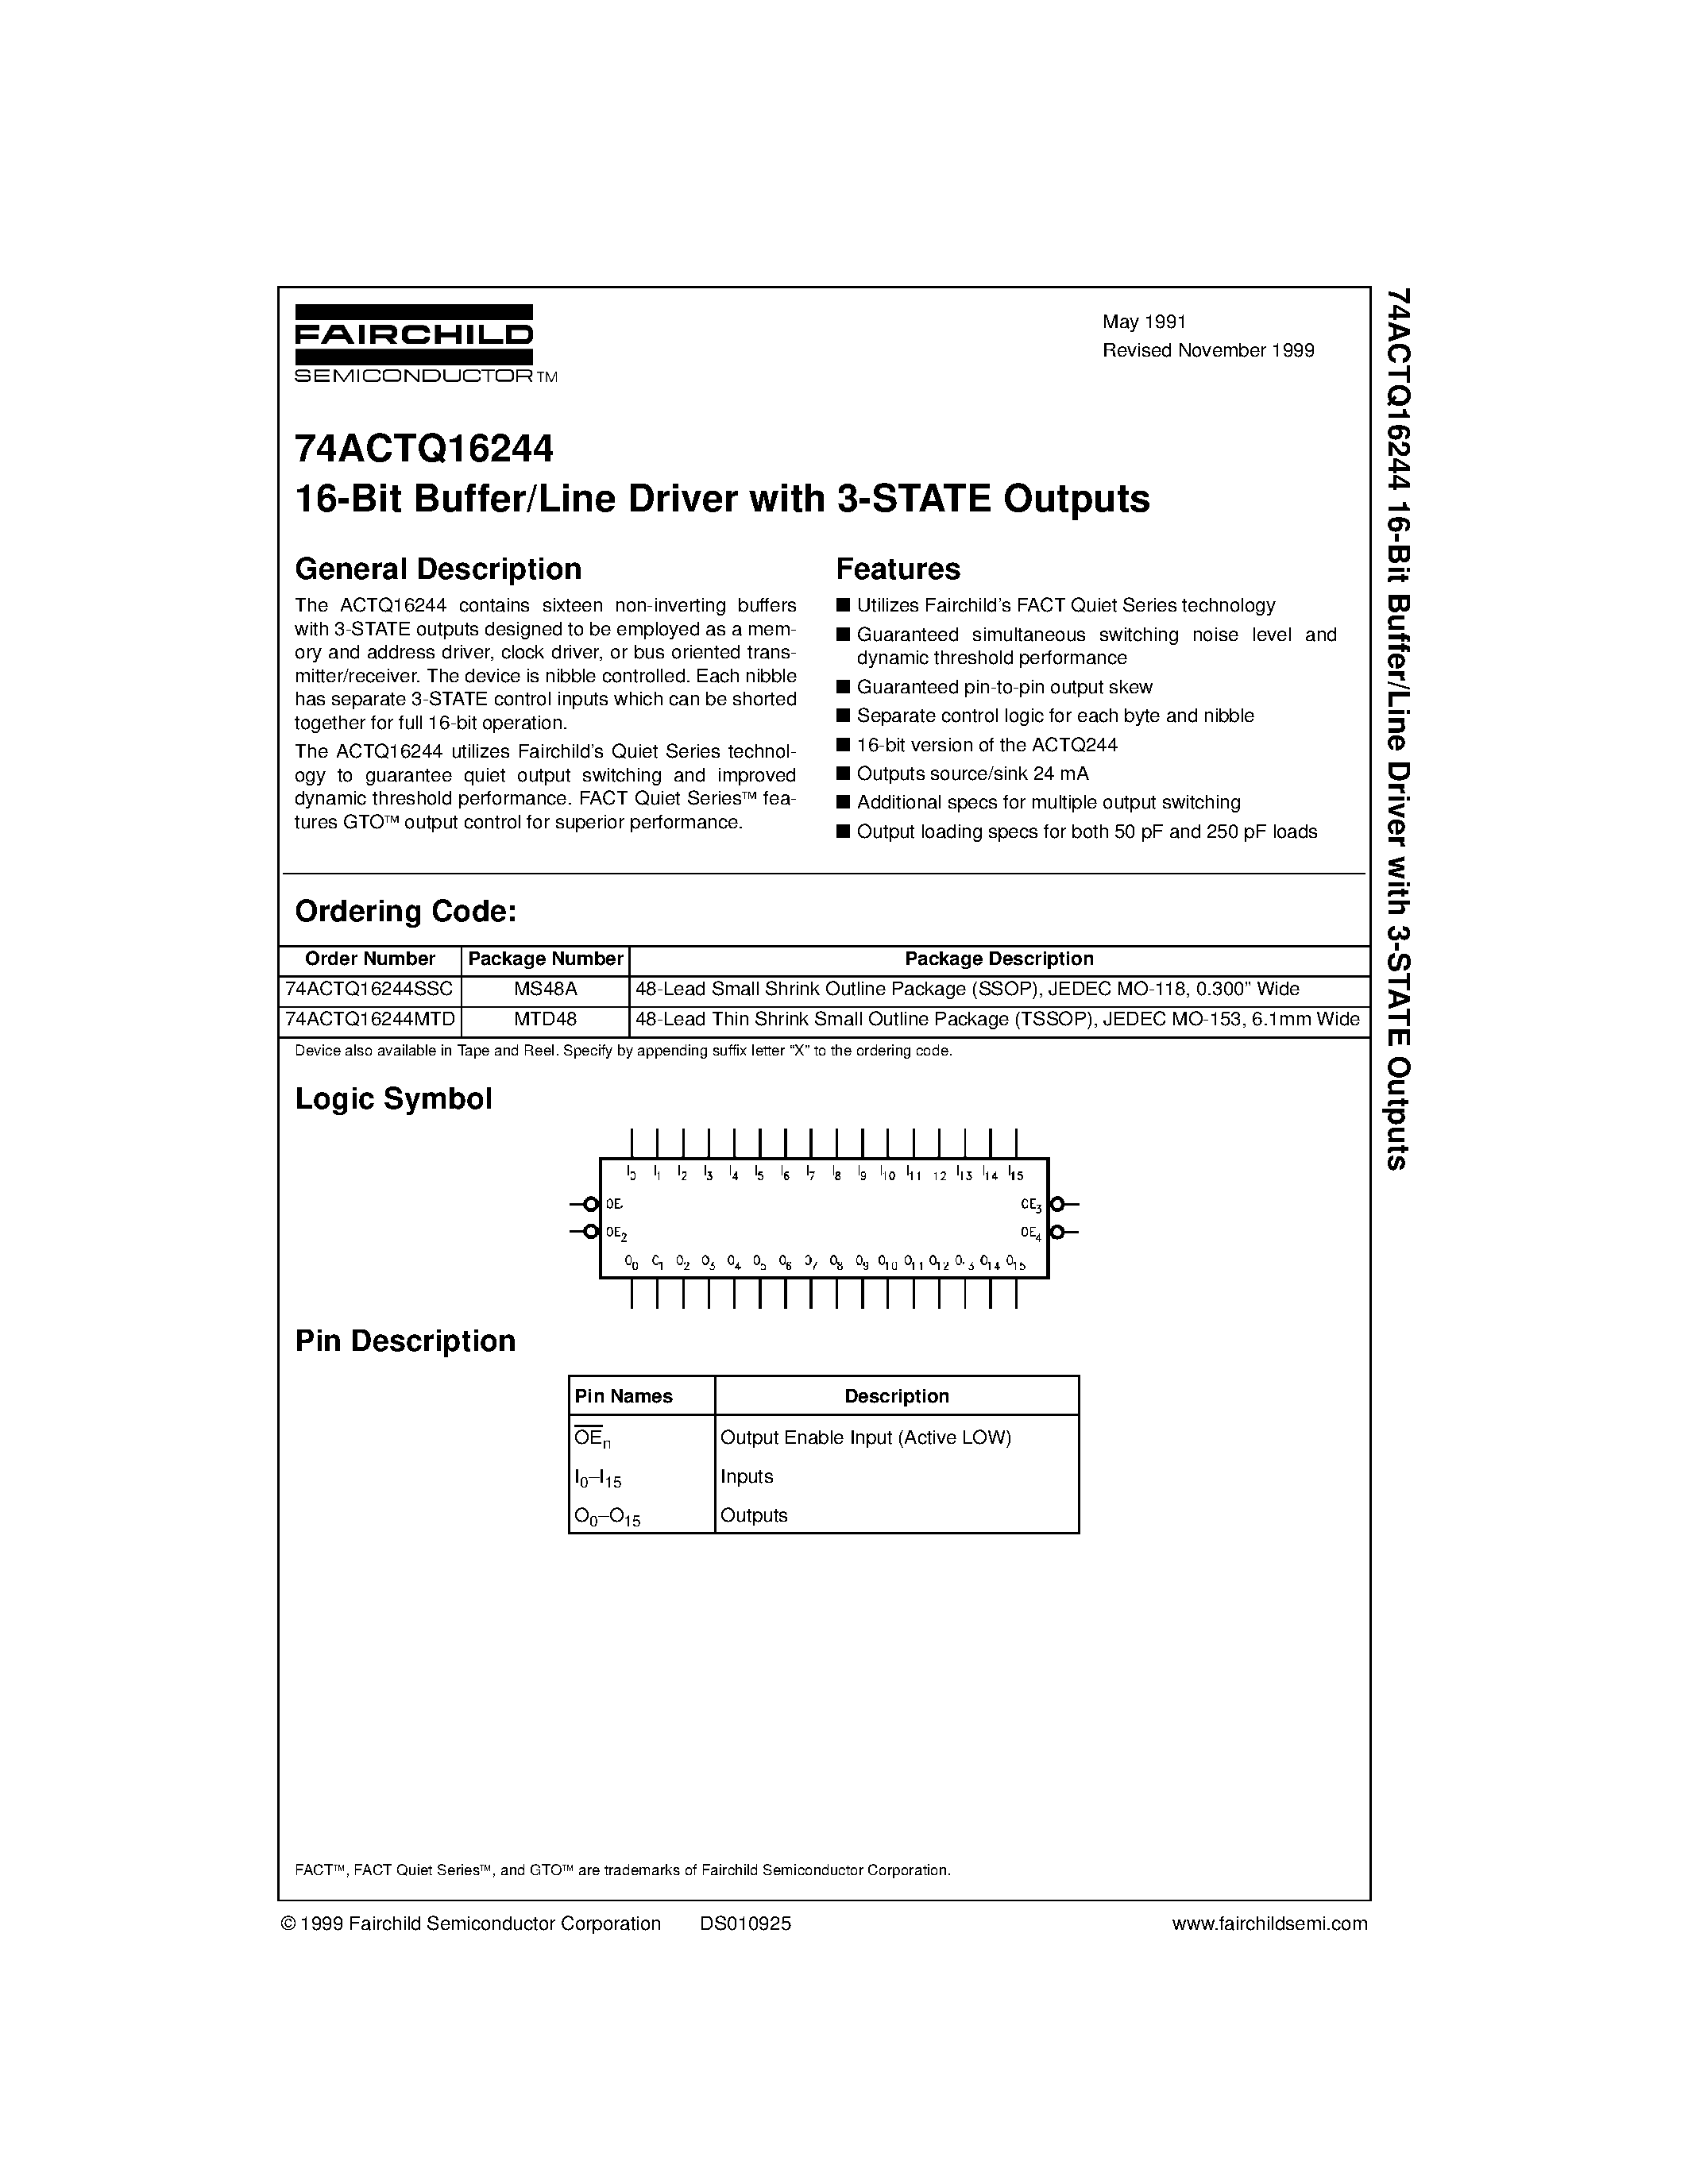 Datasheet 74ACTQ16244SSC - 16-Bit Buffer/Line Driver with 3-STATE Outputs page 1